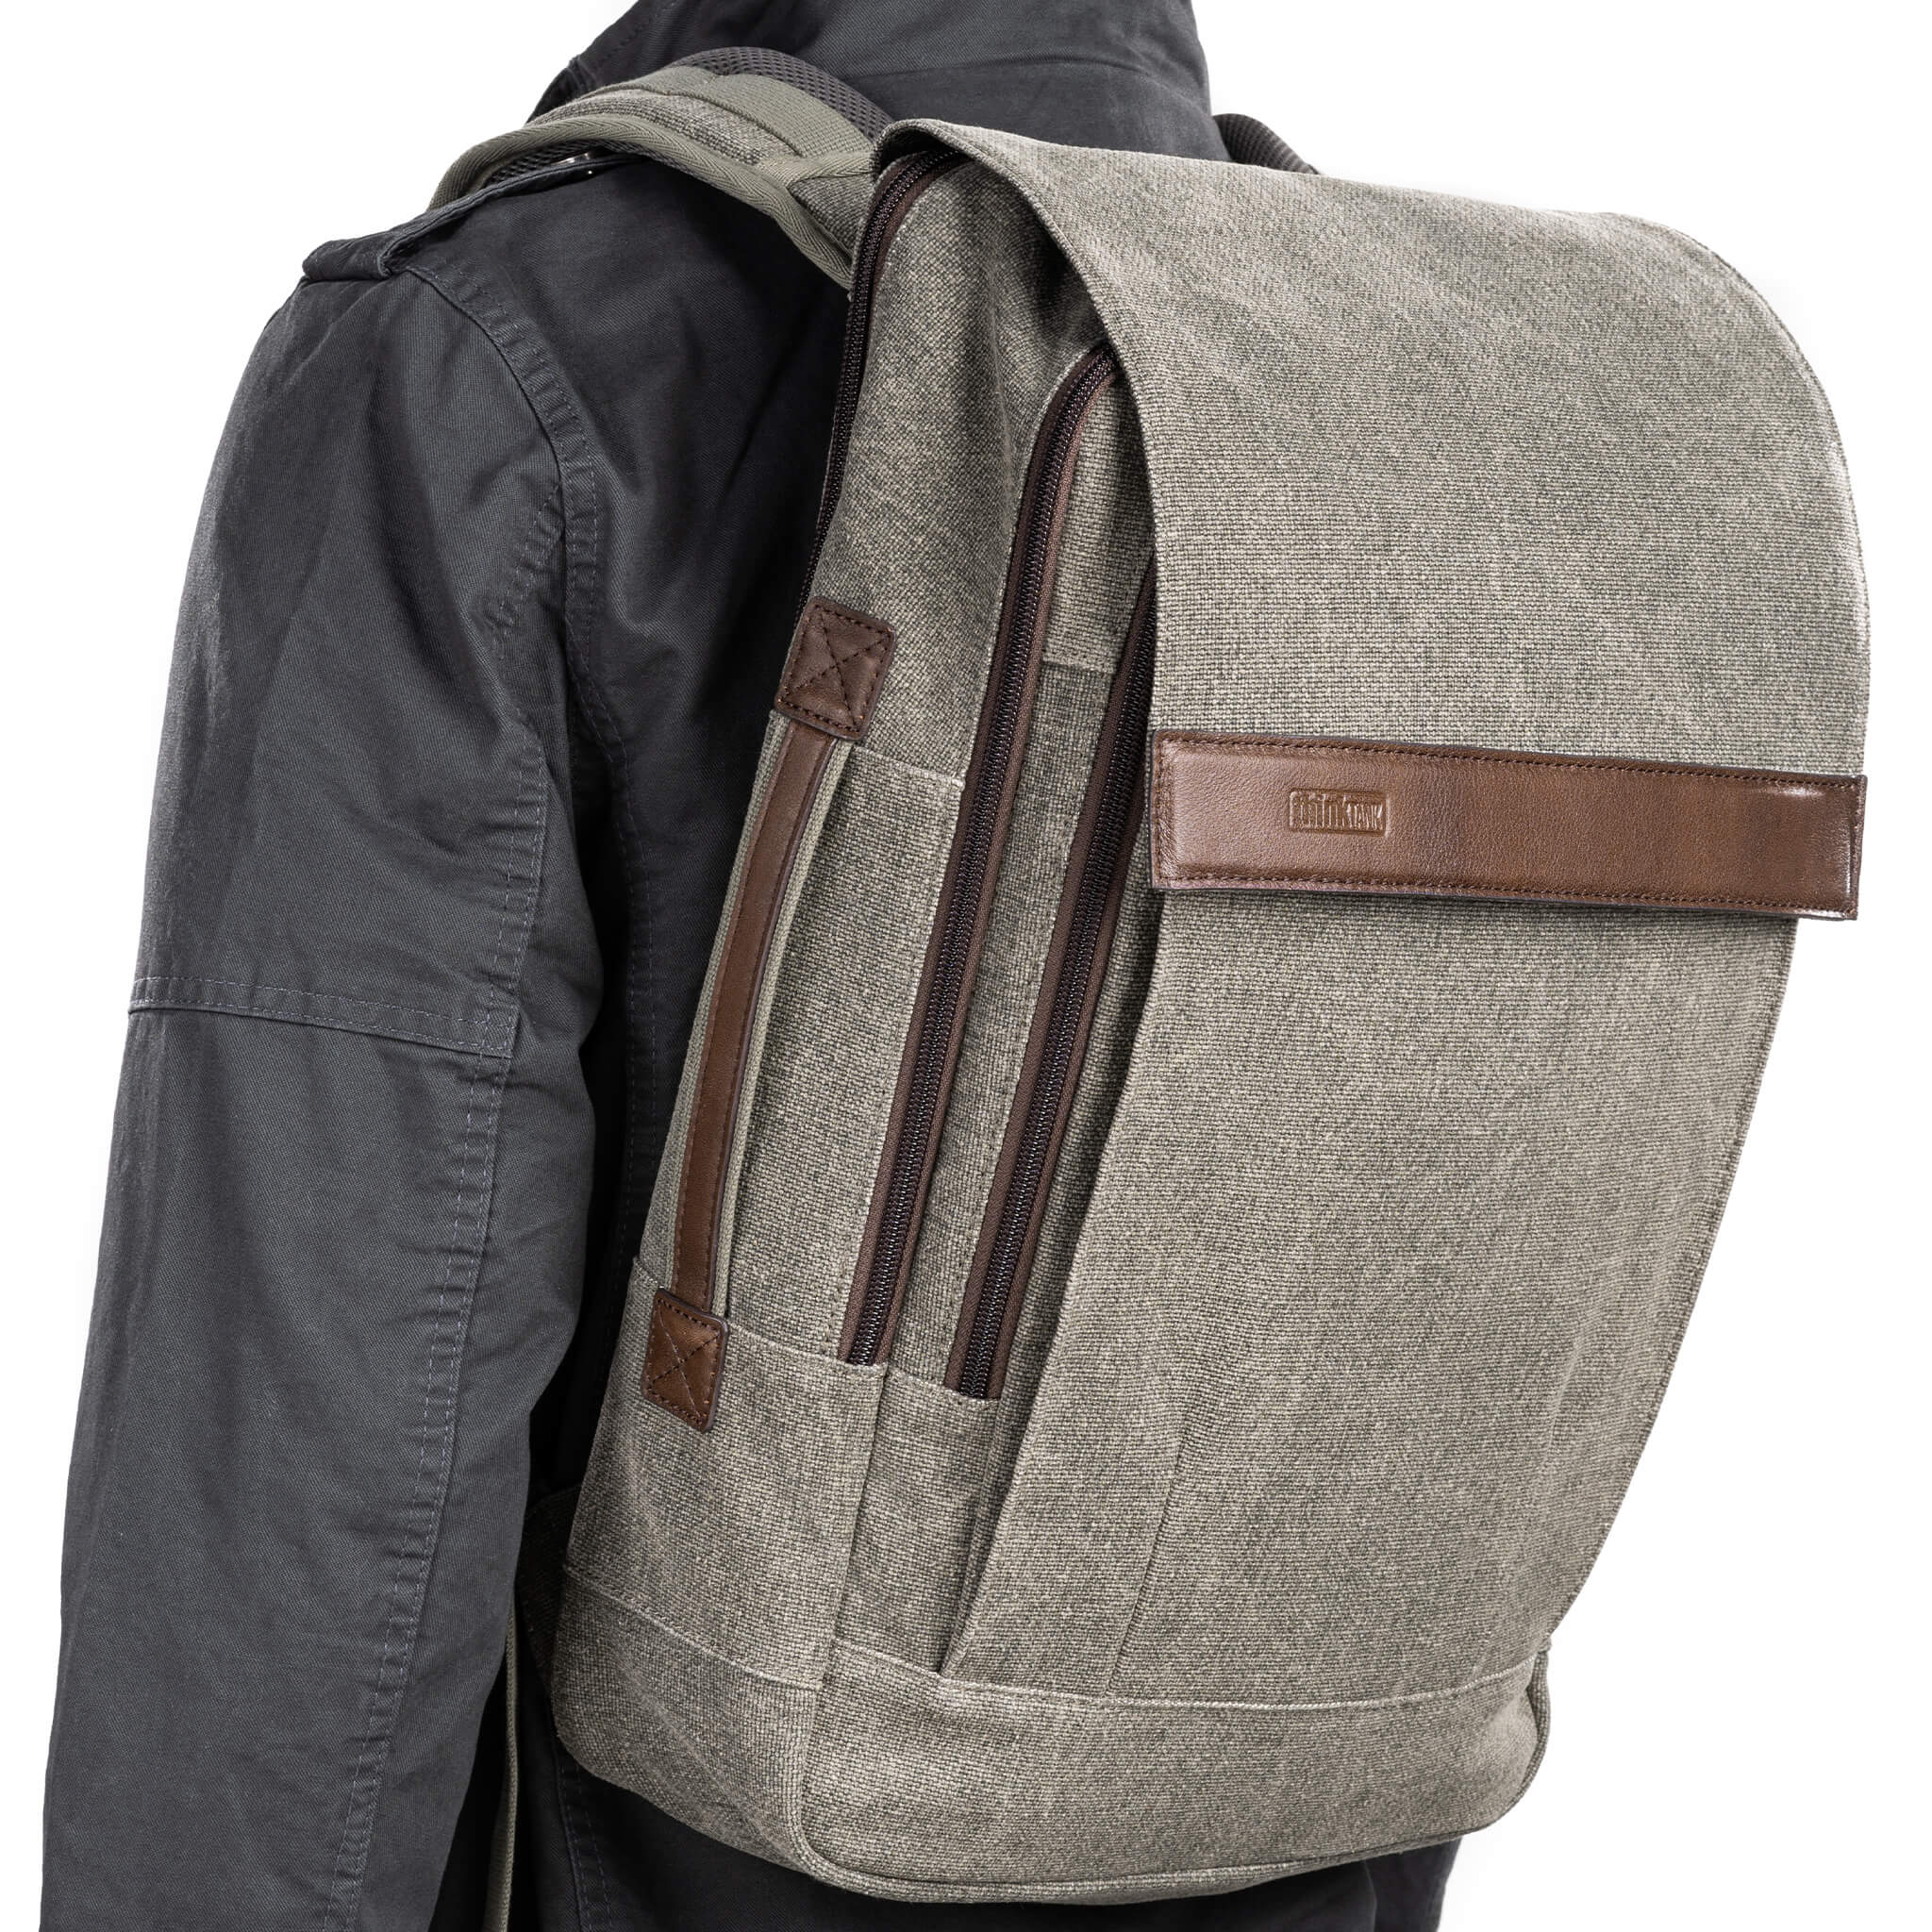 On-the-go commute and carry-on friendly. Slim profile eases maneuverability through crowds.